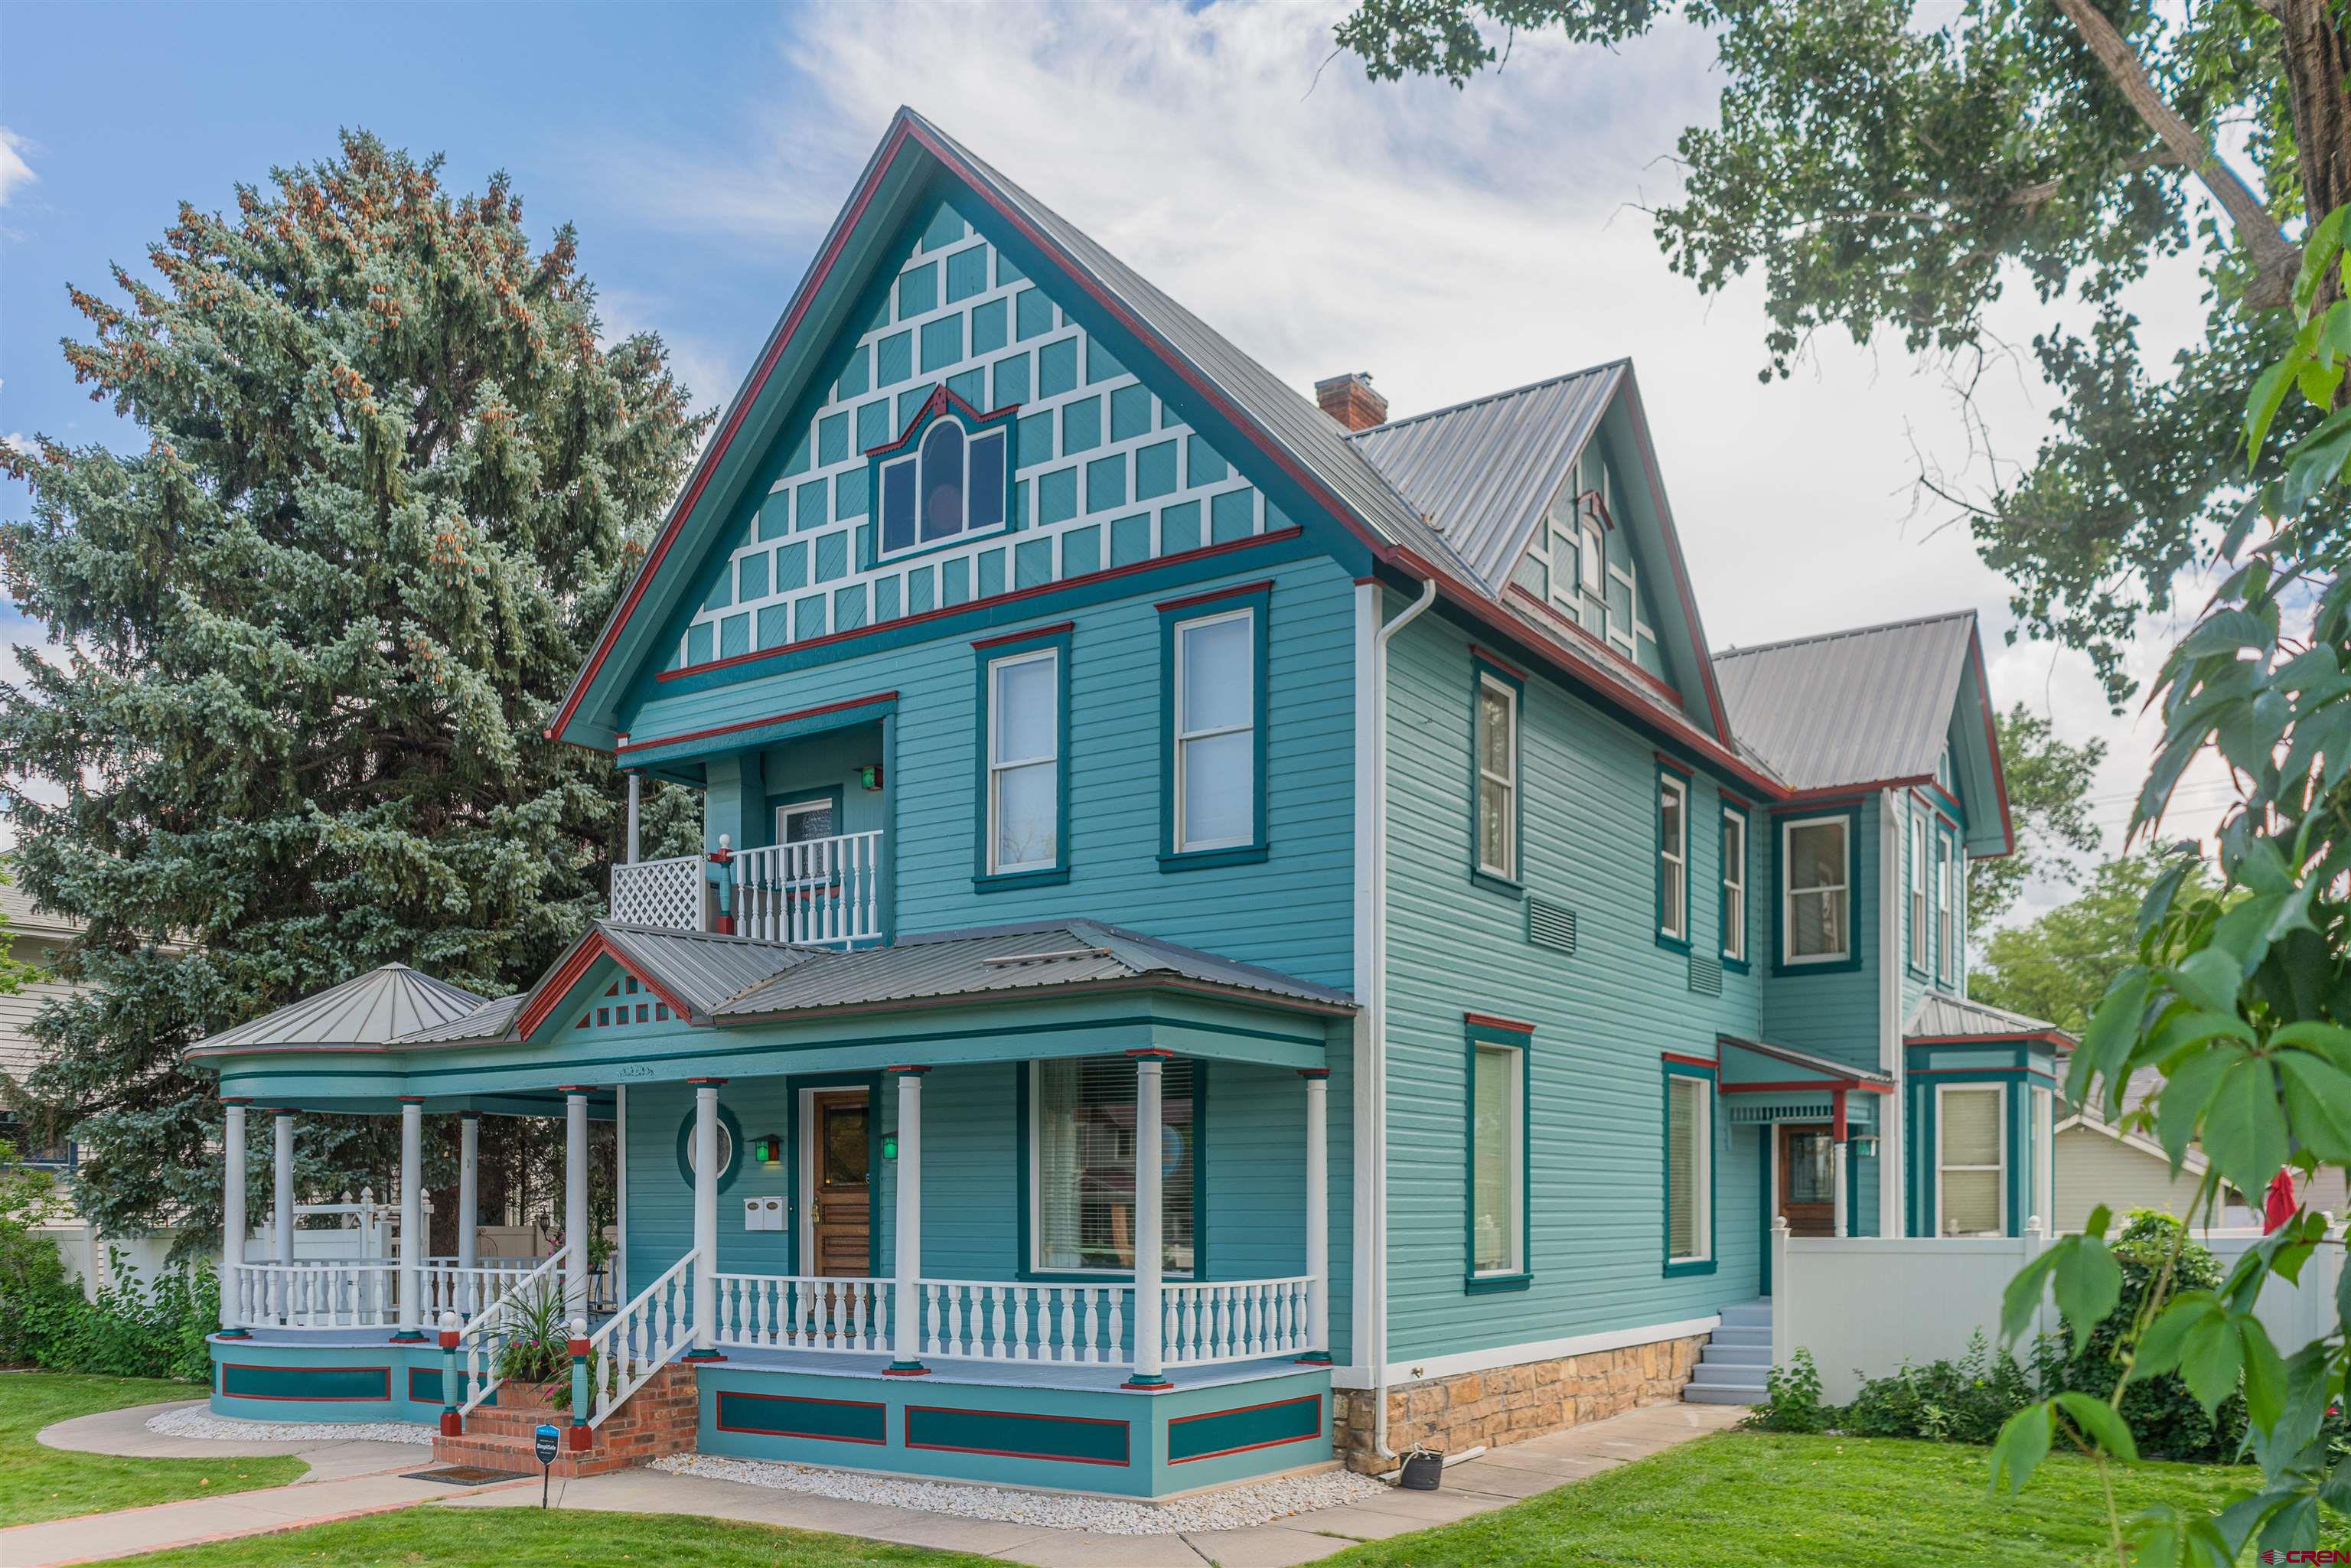 AN INCREDIBLE OPPORTUNITY AWAITS YOU TO OWN A HOME WITH  HISTORIC CHARM IN THE HEART OF DOWNTOWN MONTROSE,CO.  Originally constructed in 1902 for J.V. and Emma Lathrop's family, this architecturally impressive home embodies a period of Montrose history. The Lathrop House was listed on the National Register of Historic Places in 1988 and is one of Montrose's most well recognized buildings on Main Street with its beautiful architecture and simple classic lines. This Victorian home was the most expensive built in the town around the time of construction and the largest.  Today, this home boasts 6 bedrooms and 5 baths total, with several living spaces, an office, a formal dining room, chef's kitchen, 2 built in fireplaces and a beautiful wrap-around porch designed by Emma Lathrop herself. It is currently split into 3 different apartments with separate entrances but can easily be utilized as a Bed & Breakfast as it was previously. The attention to detail from the columns and scrollwork to the wallpaper and stained-glass windows throughout in this home are a must see. Schedule a tour today! The House comes fully furnished with the exception of personal items. A list of these items to be provided by Seller before closing.